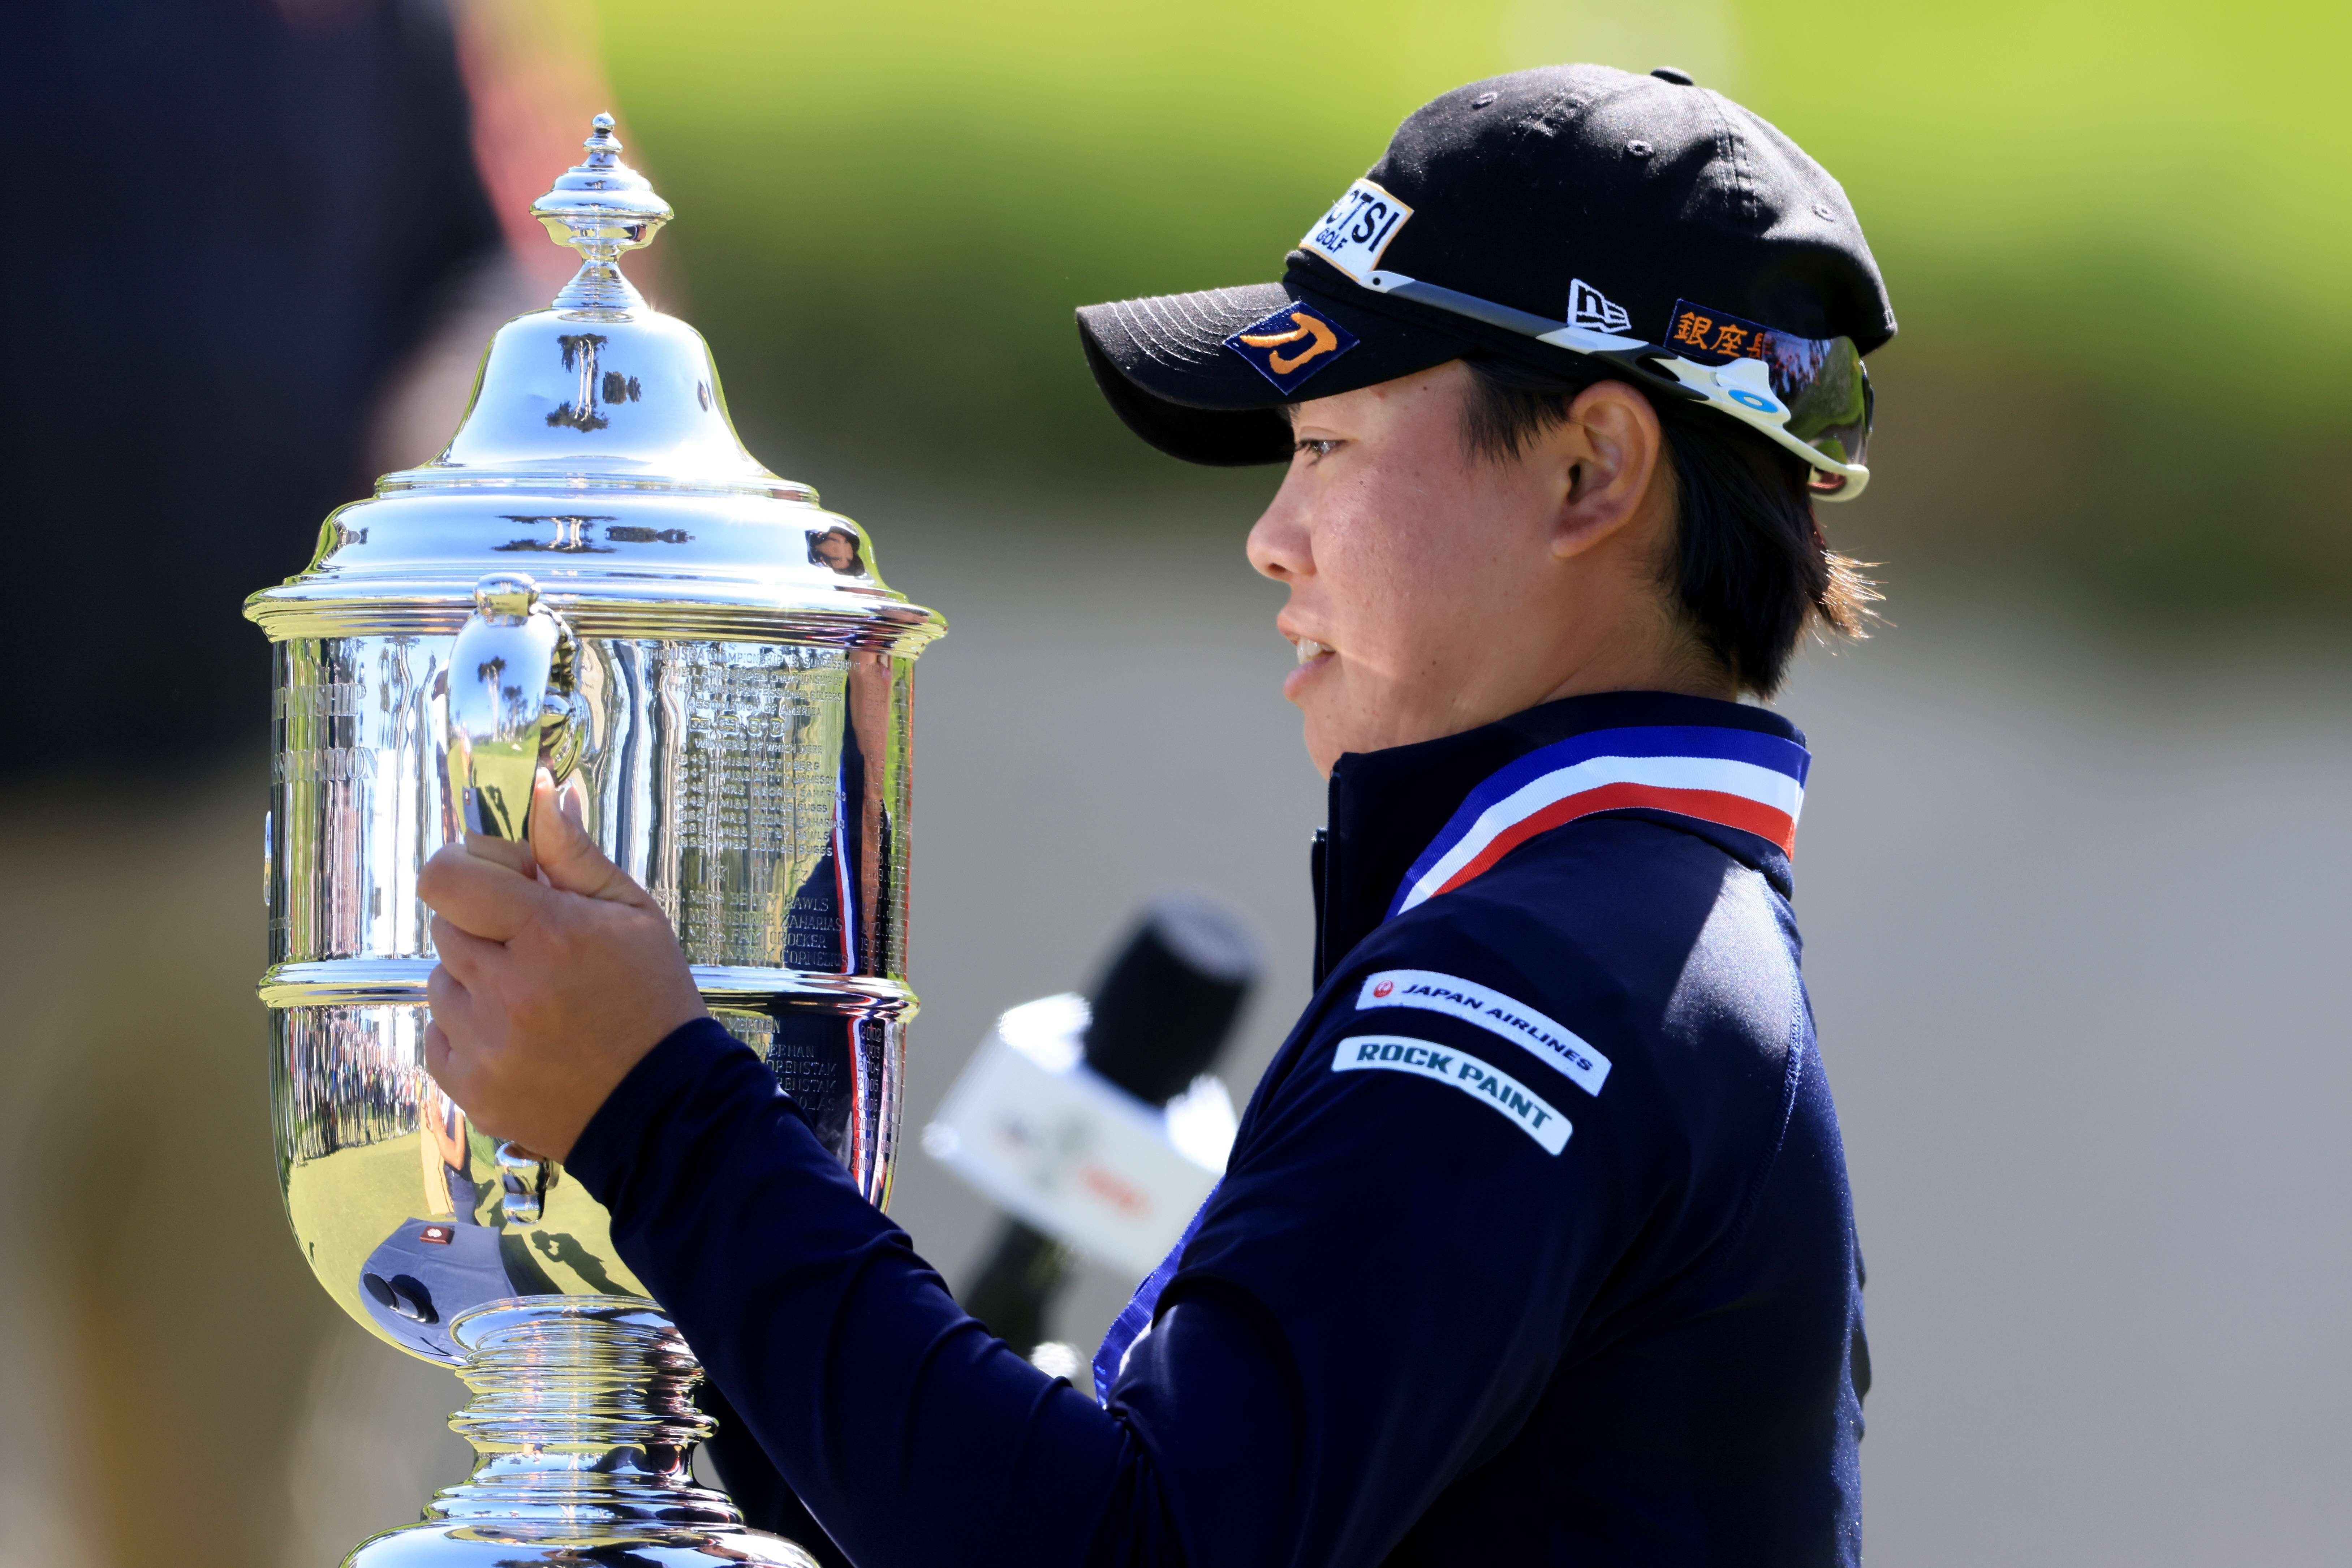 Yuka Saso of the Philippines celebrates with the Harton S. Semple Trophy after winning the 76th US Women's Open Championship at The Olympic Club in San Francisco. Photo: AFP